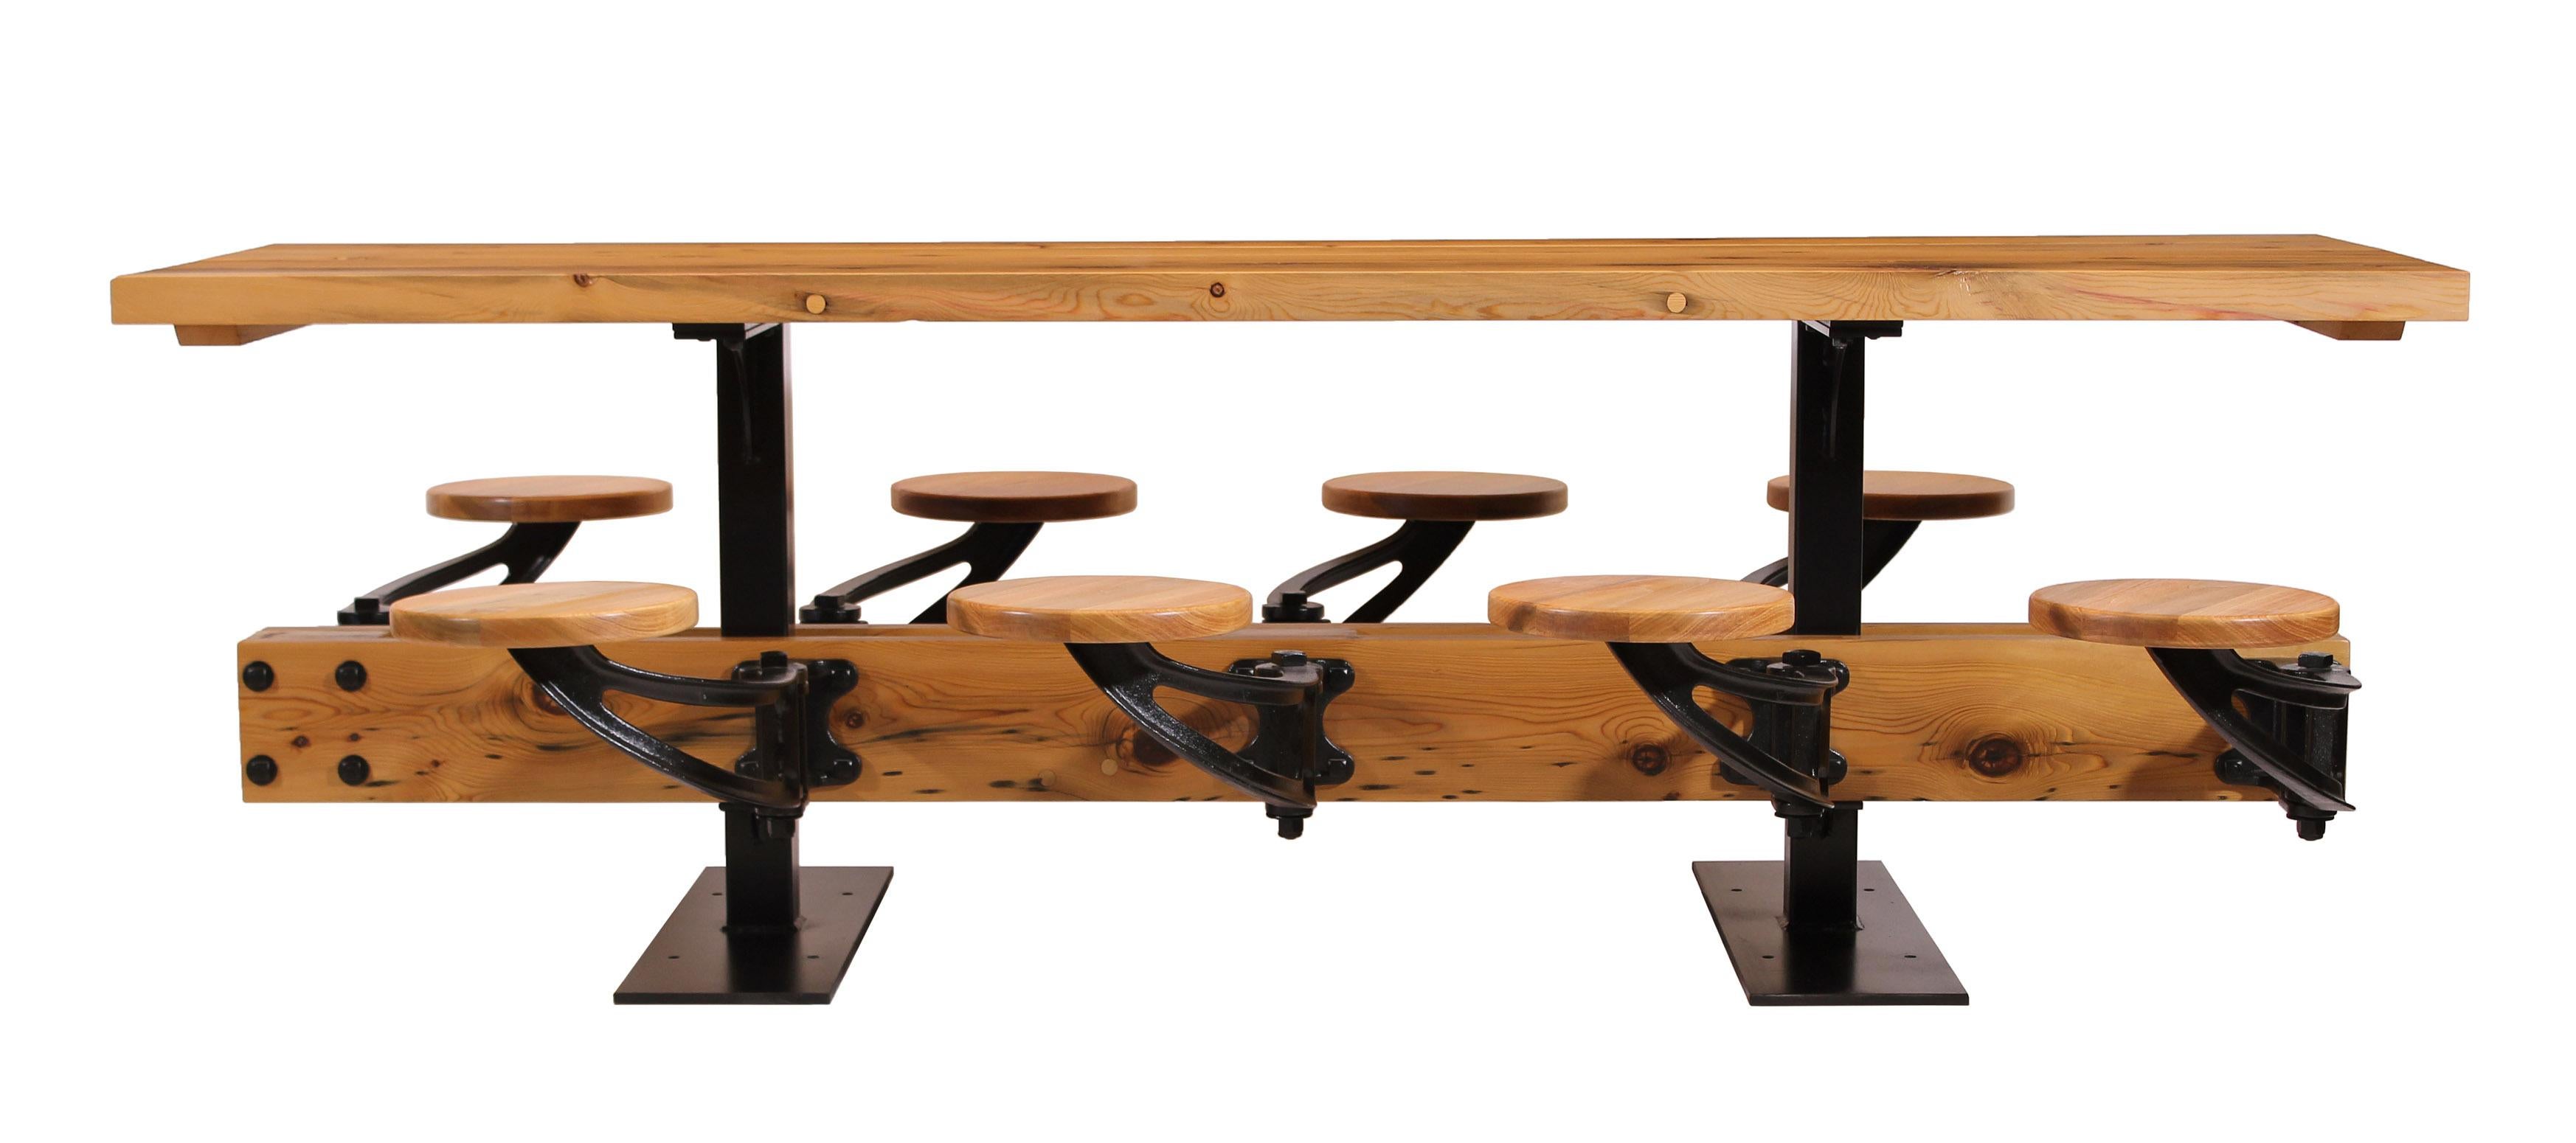 Cast Industrial Library Table with Swing-Out Stools and Reclaimed Pine 4-24 Seats For Sale